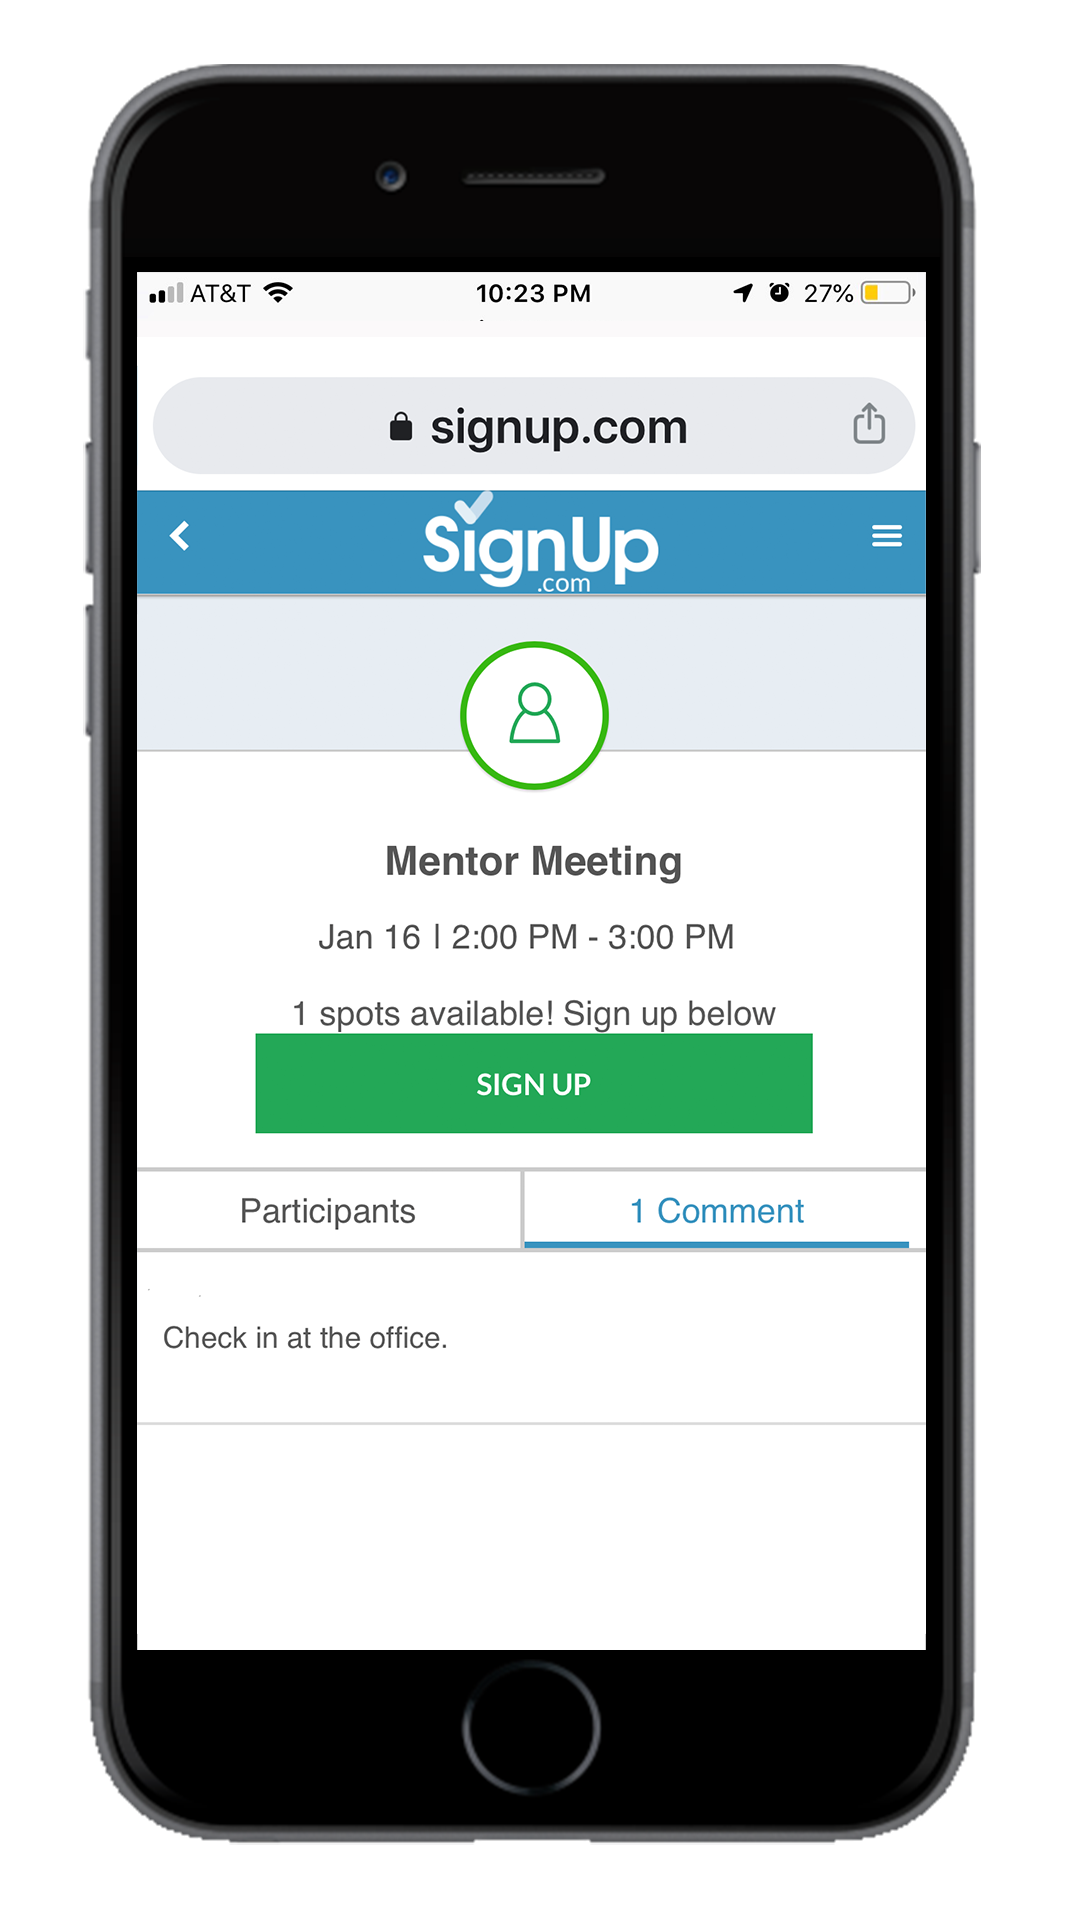 iPhone Mentor Meeting on SignUp